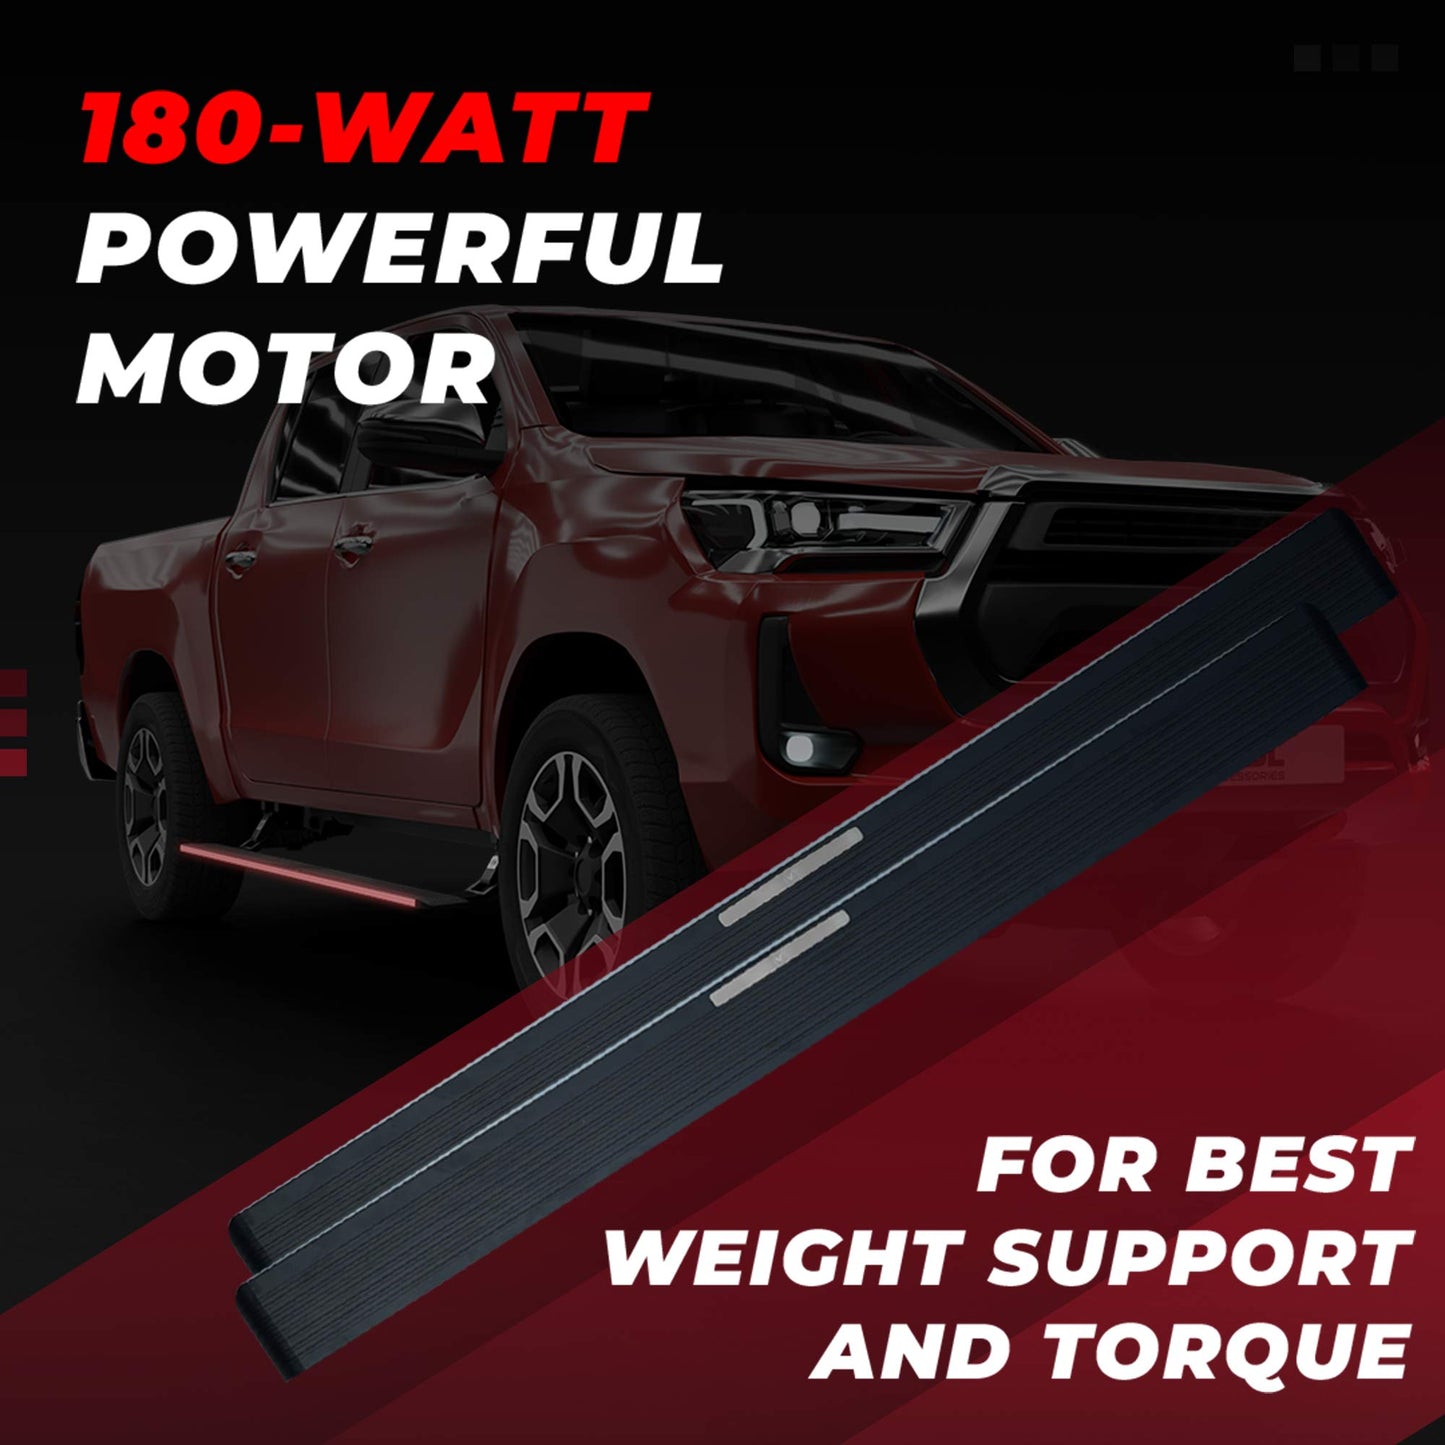 JCBL Accessories Automatic Door Side E-Step for SUVs ( Toyota Hilux Revo 16+ E-Side Step ) | 180-WATT POWERFUL MOTOR z FOR BEST WEIGHT SUPPORT AND TORQUE